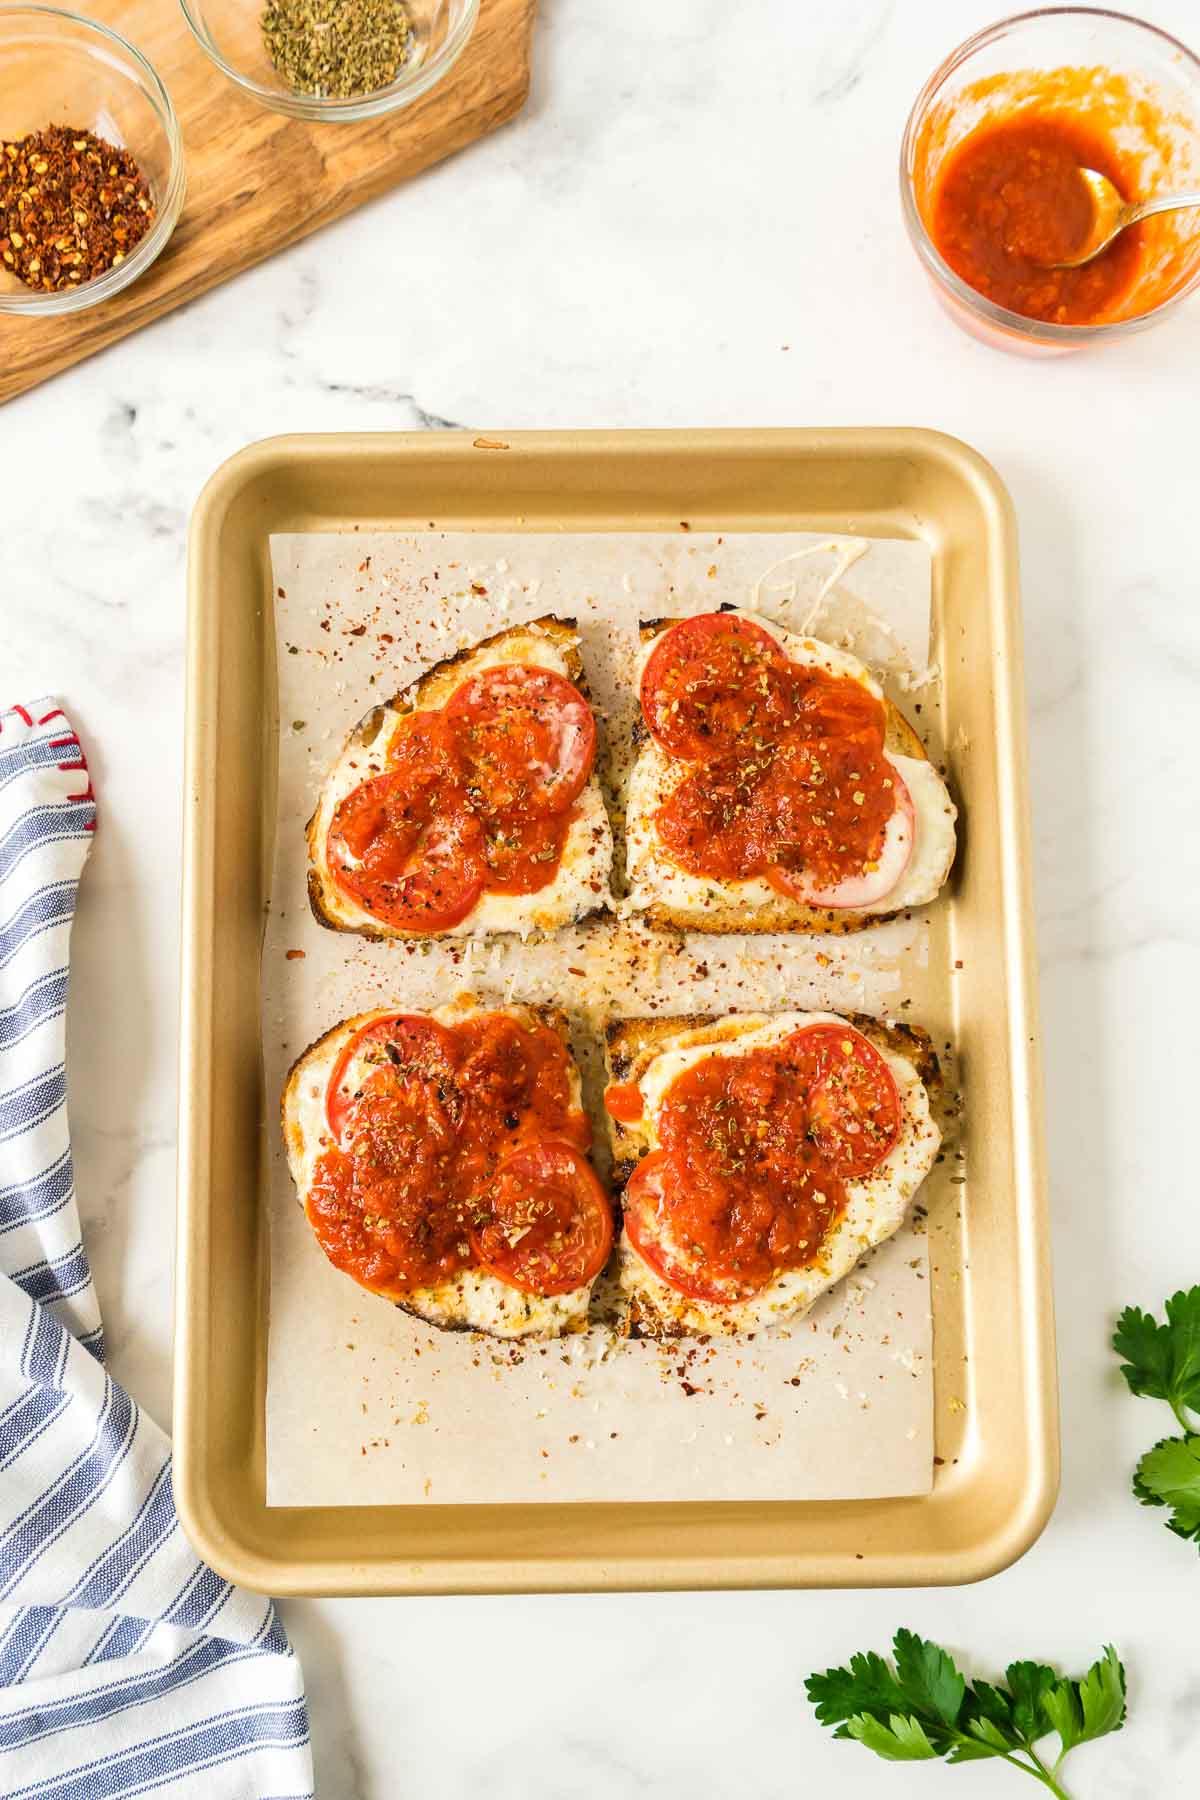 The finished viral pizza toast recipe (Hailey Bieber) with warm marinara, red pepper flakes, oregano and Parmesan cheese on a small baking sheet.